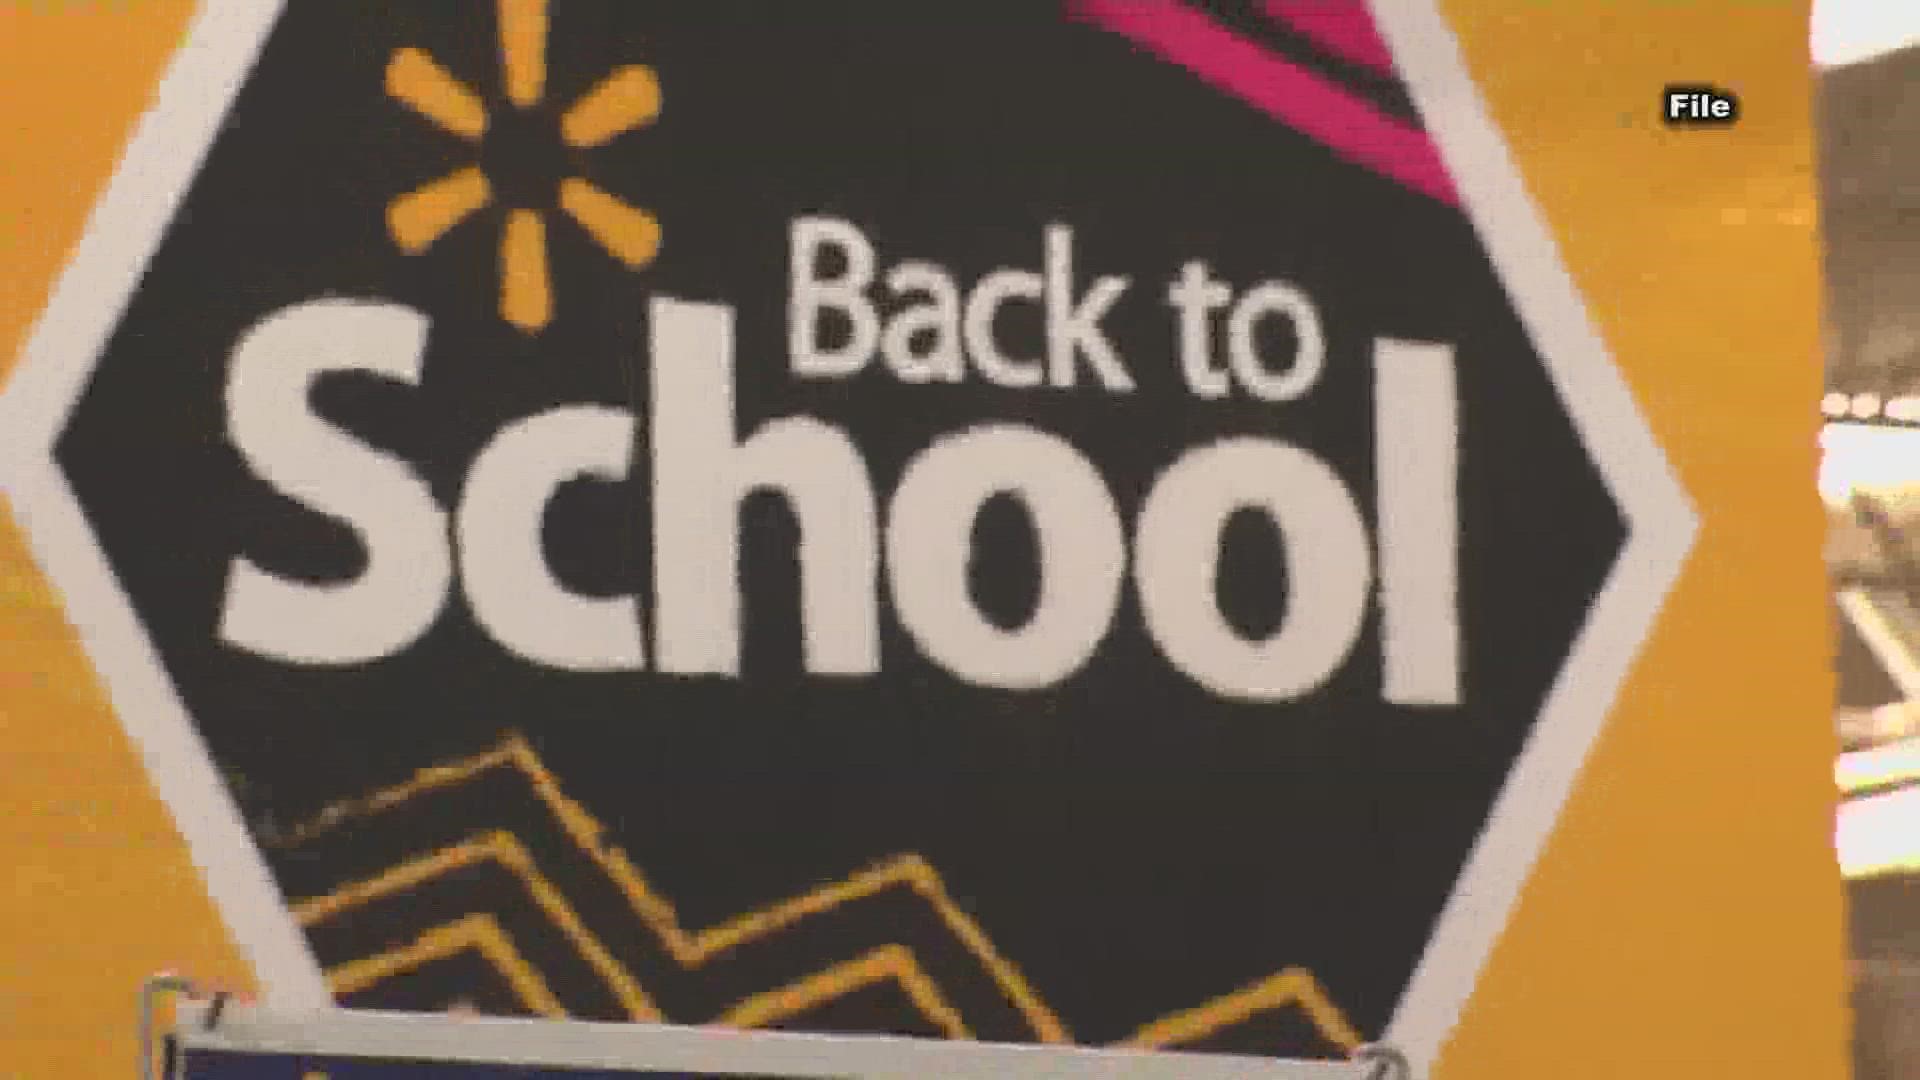 Tax Free Weekend is here and experts say parents can save a few bucks on school supplies when they shop this weekend.